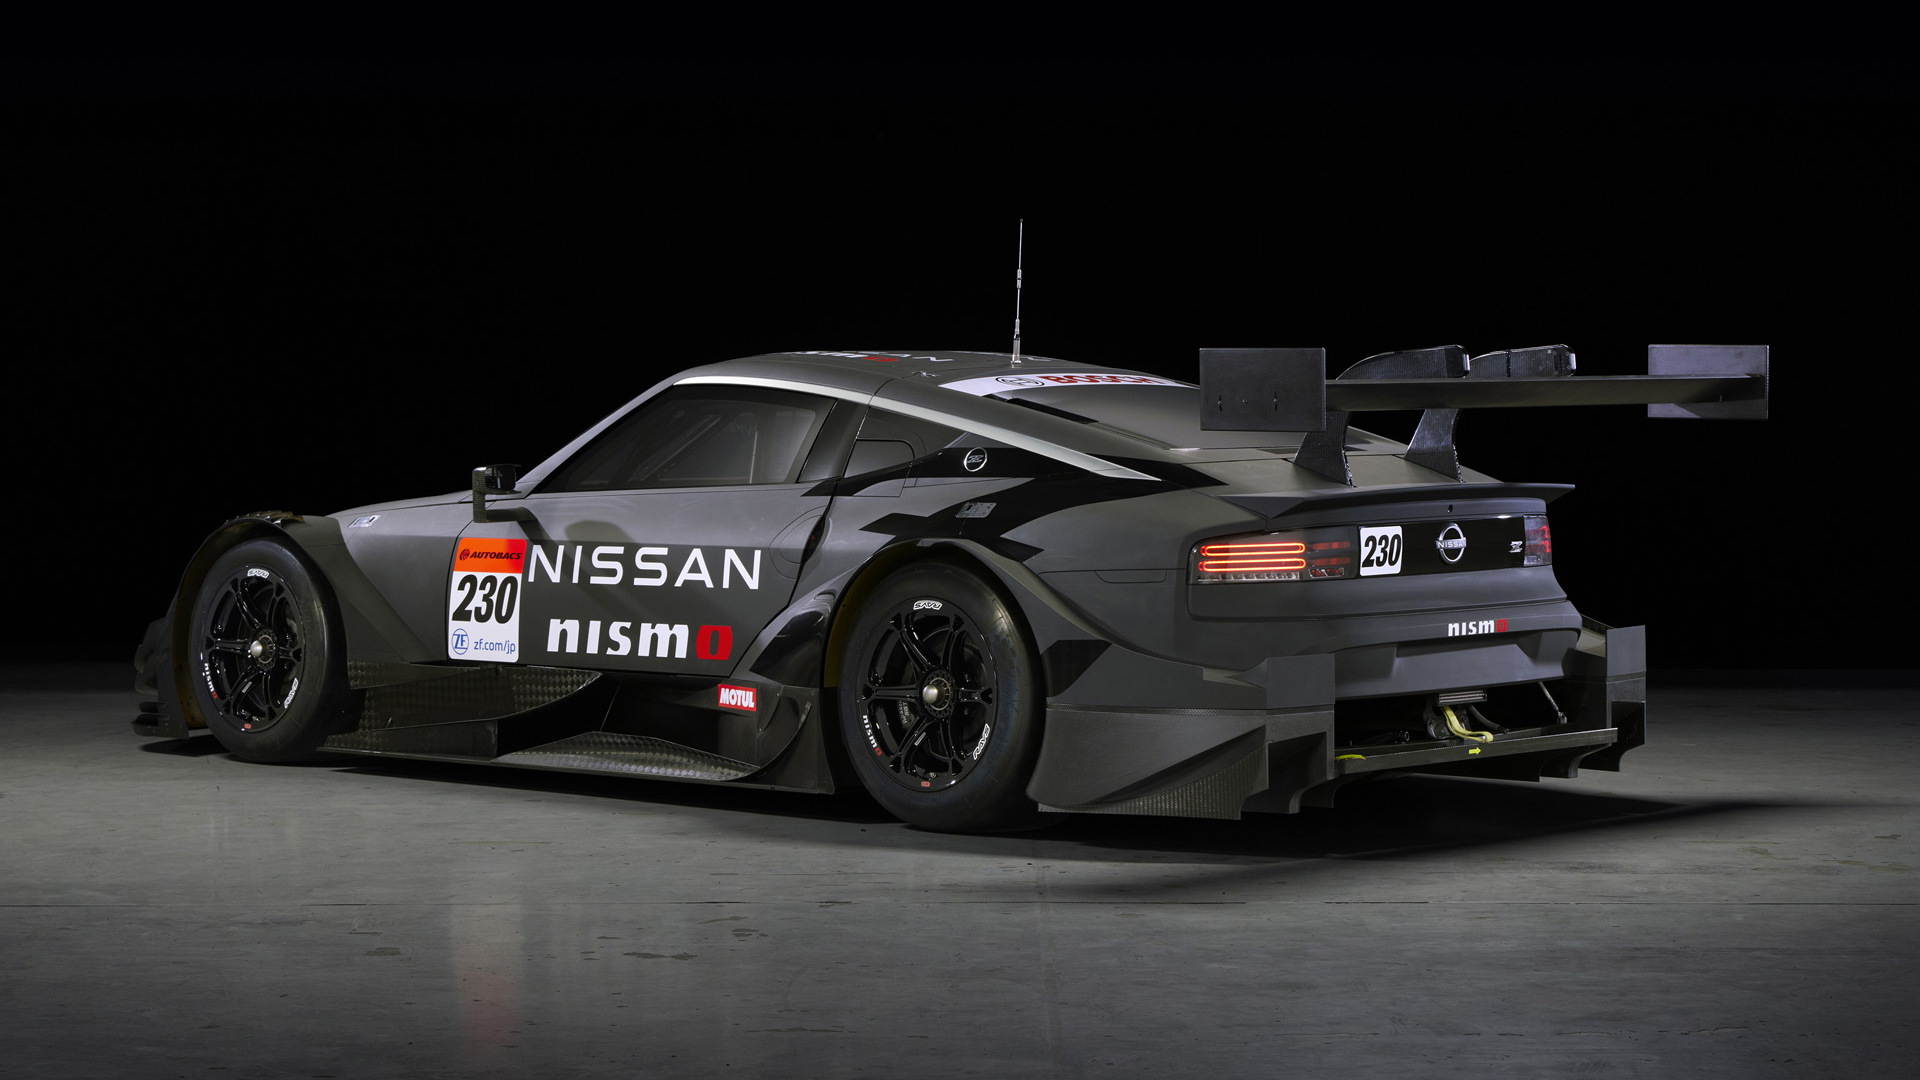 This wide-body Nissan Z GT500 replaces the GT-R in Japan's Super